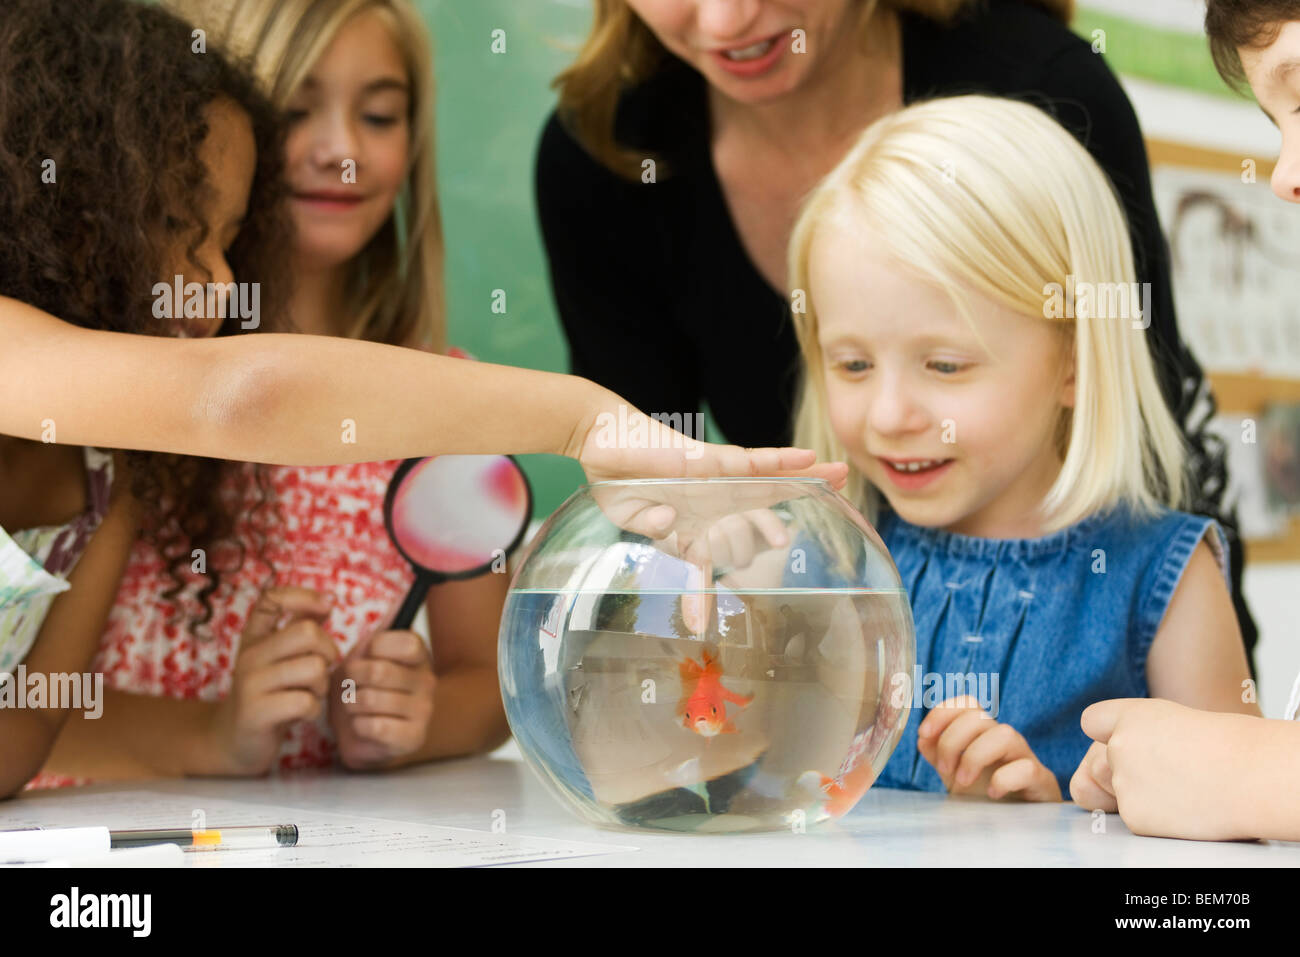 Elementary teacher and students gathered around goldfish bowl, one girl sticking finger in water Stock Photo